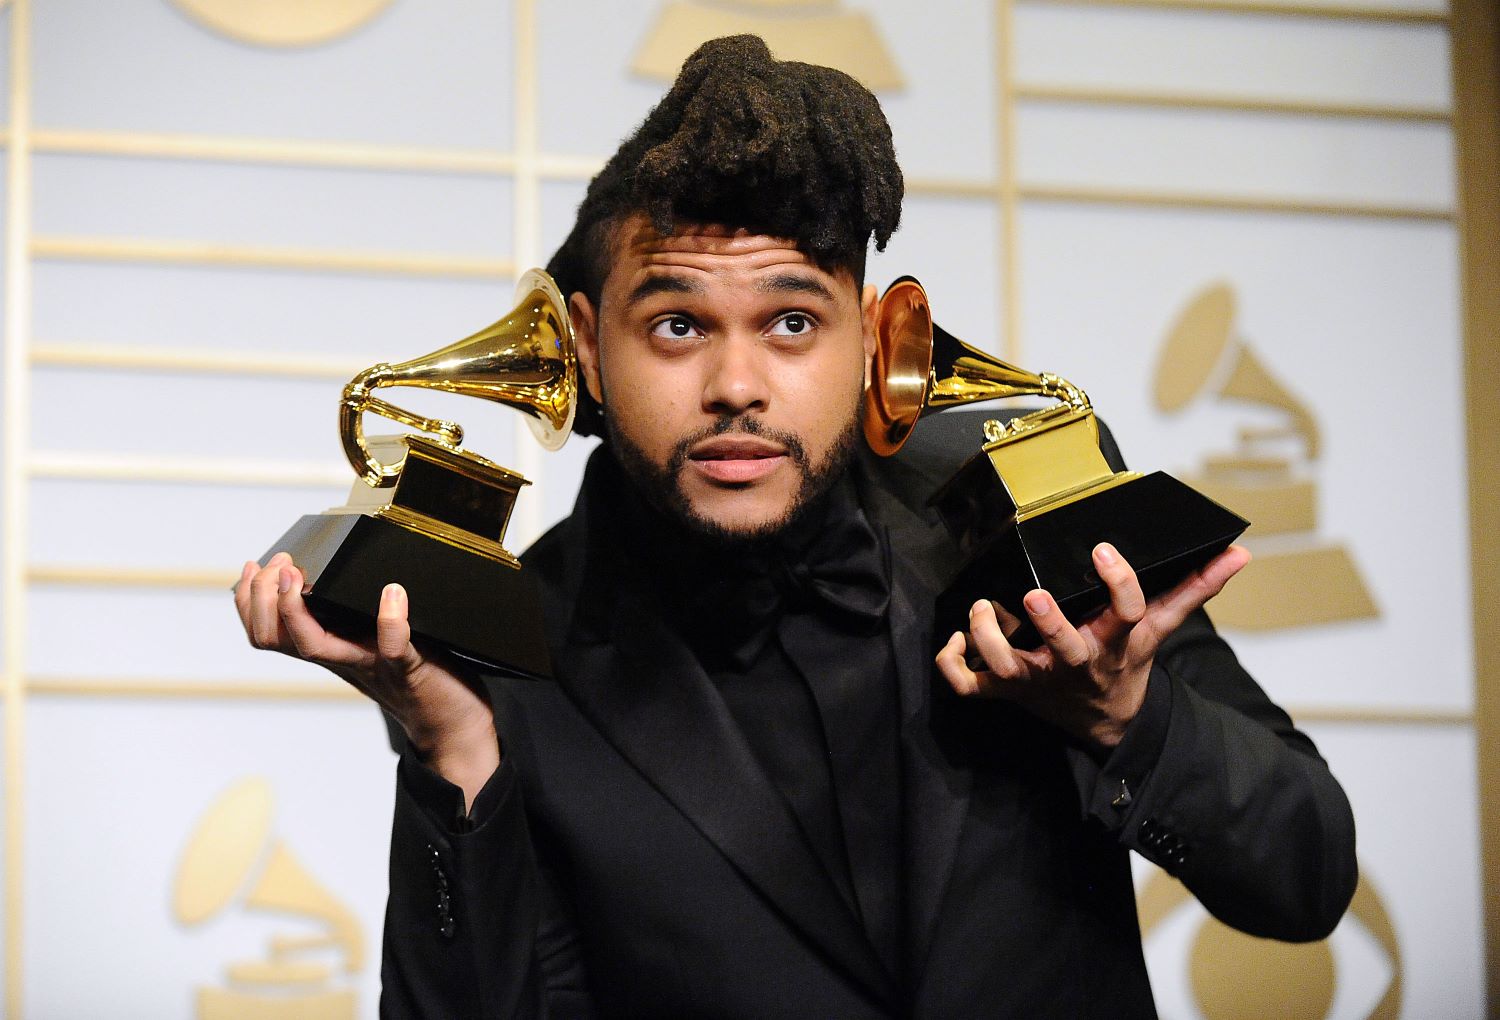 How Many Grammys Has The Weeknd Won?